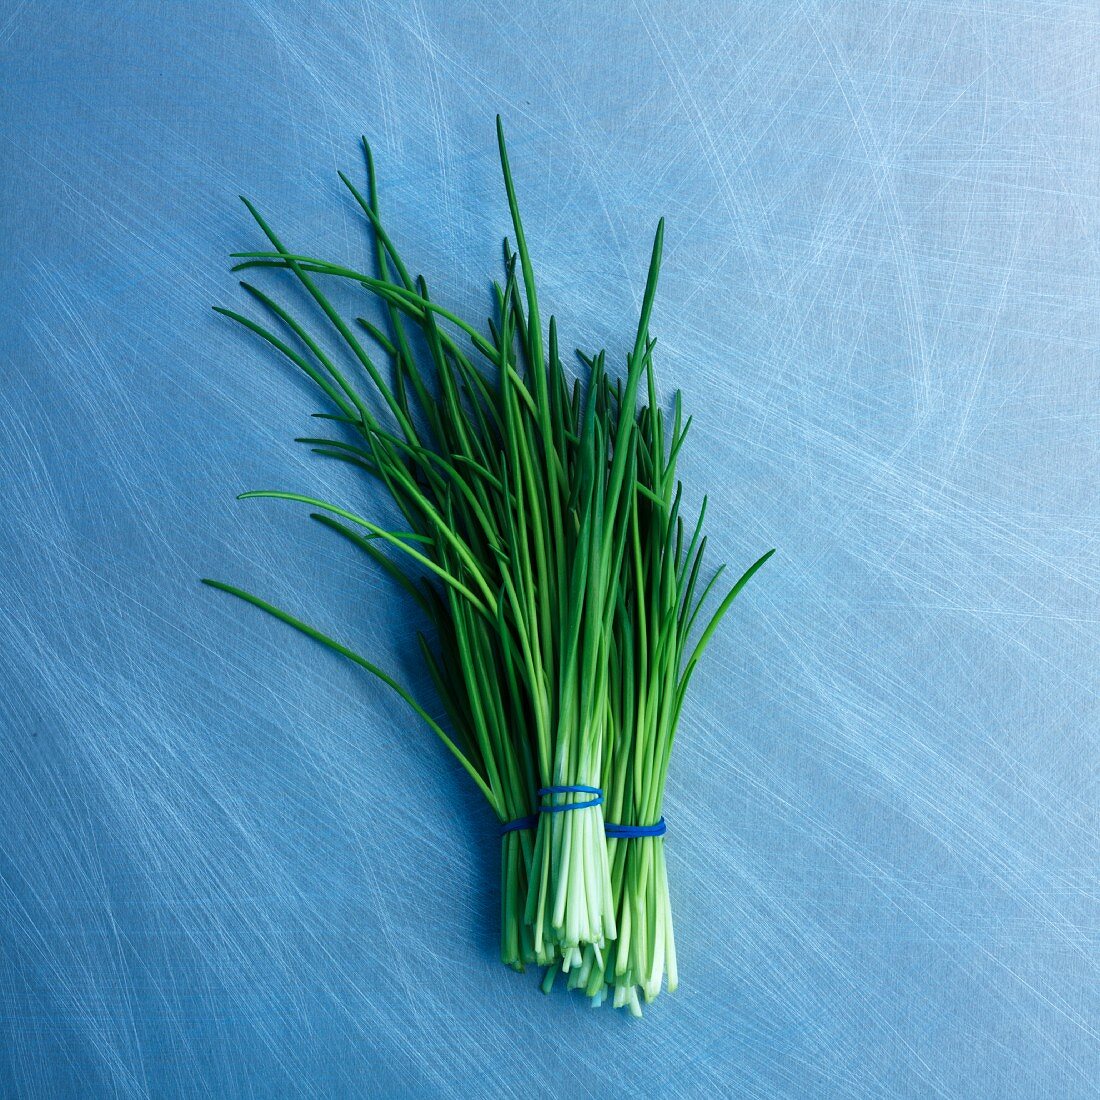 Bunches of chives (seen from above)